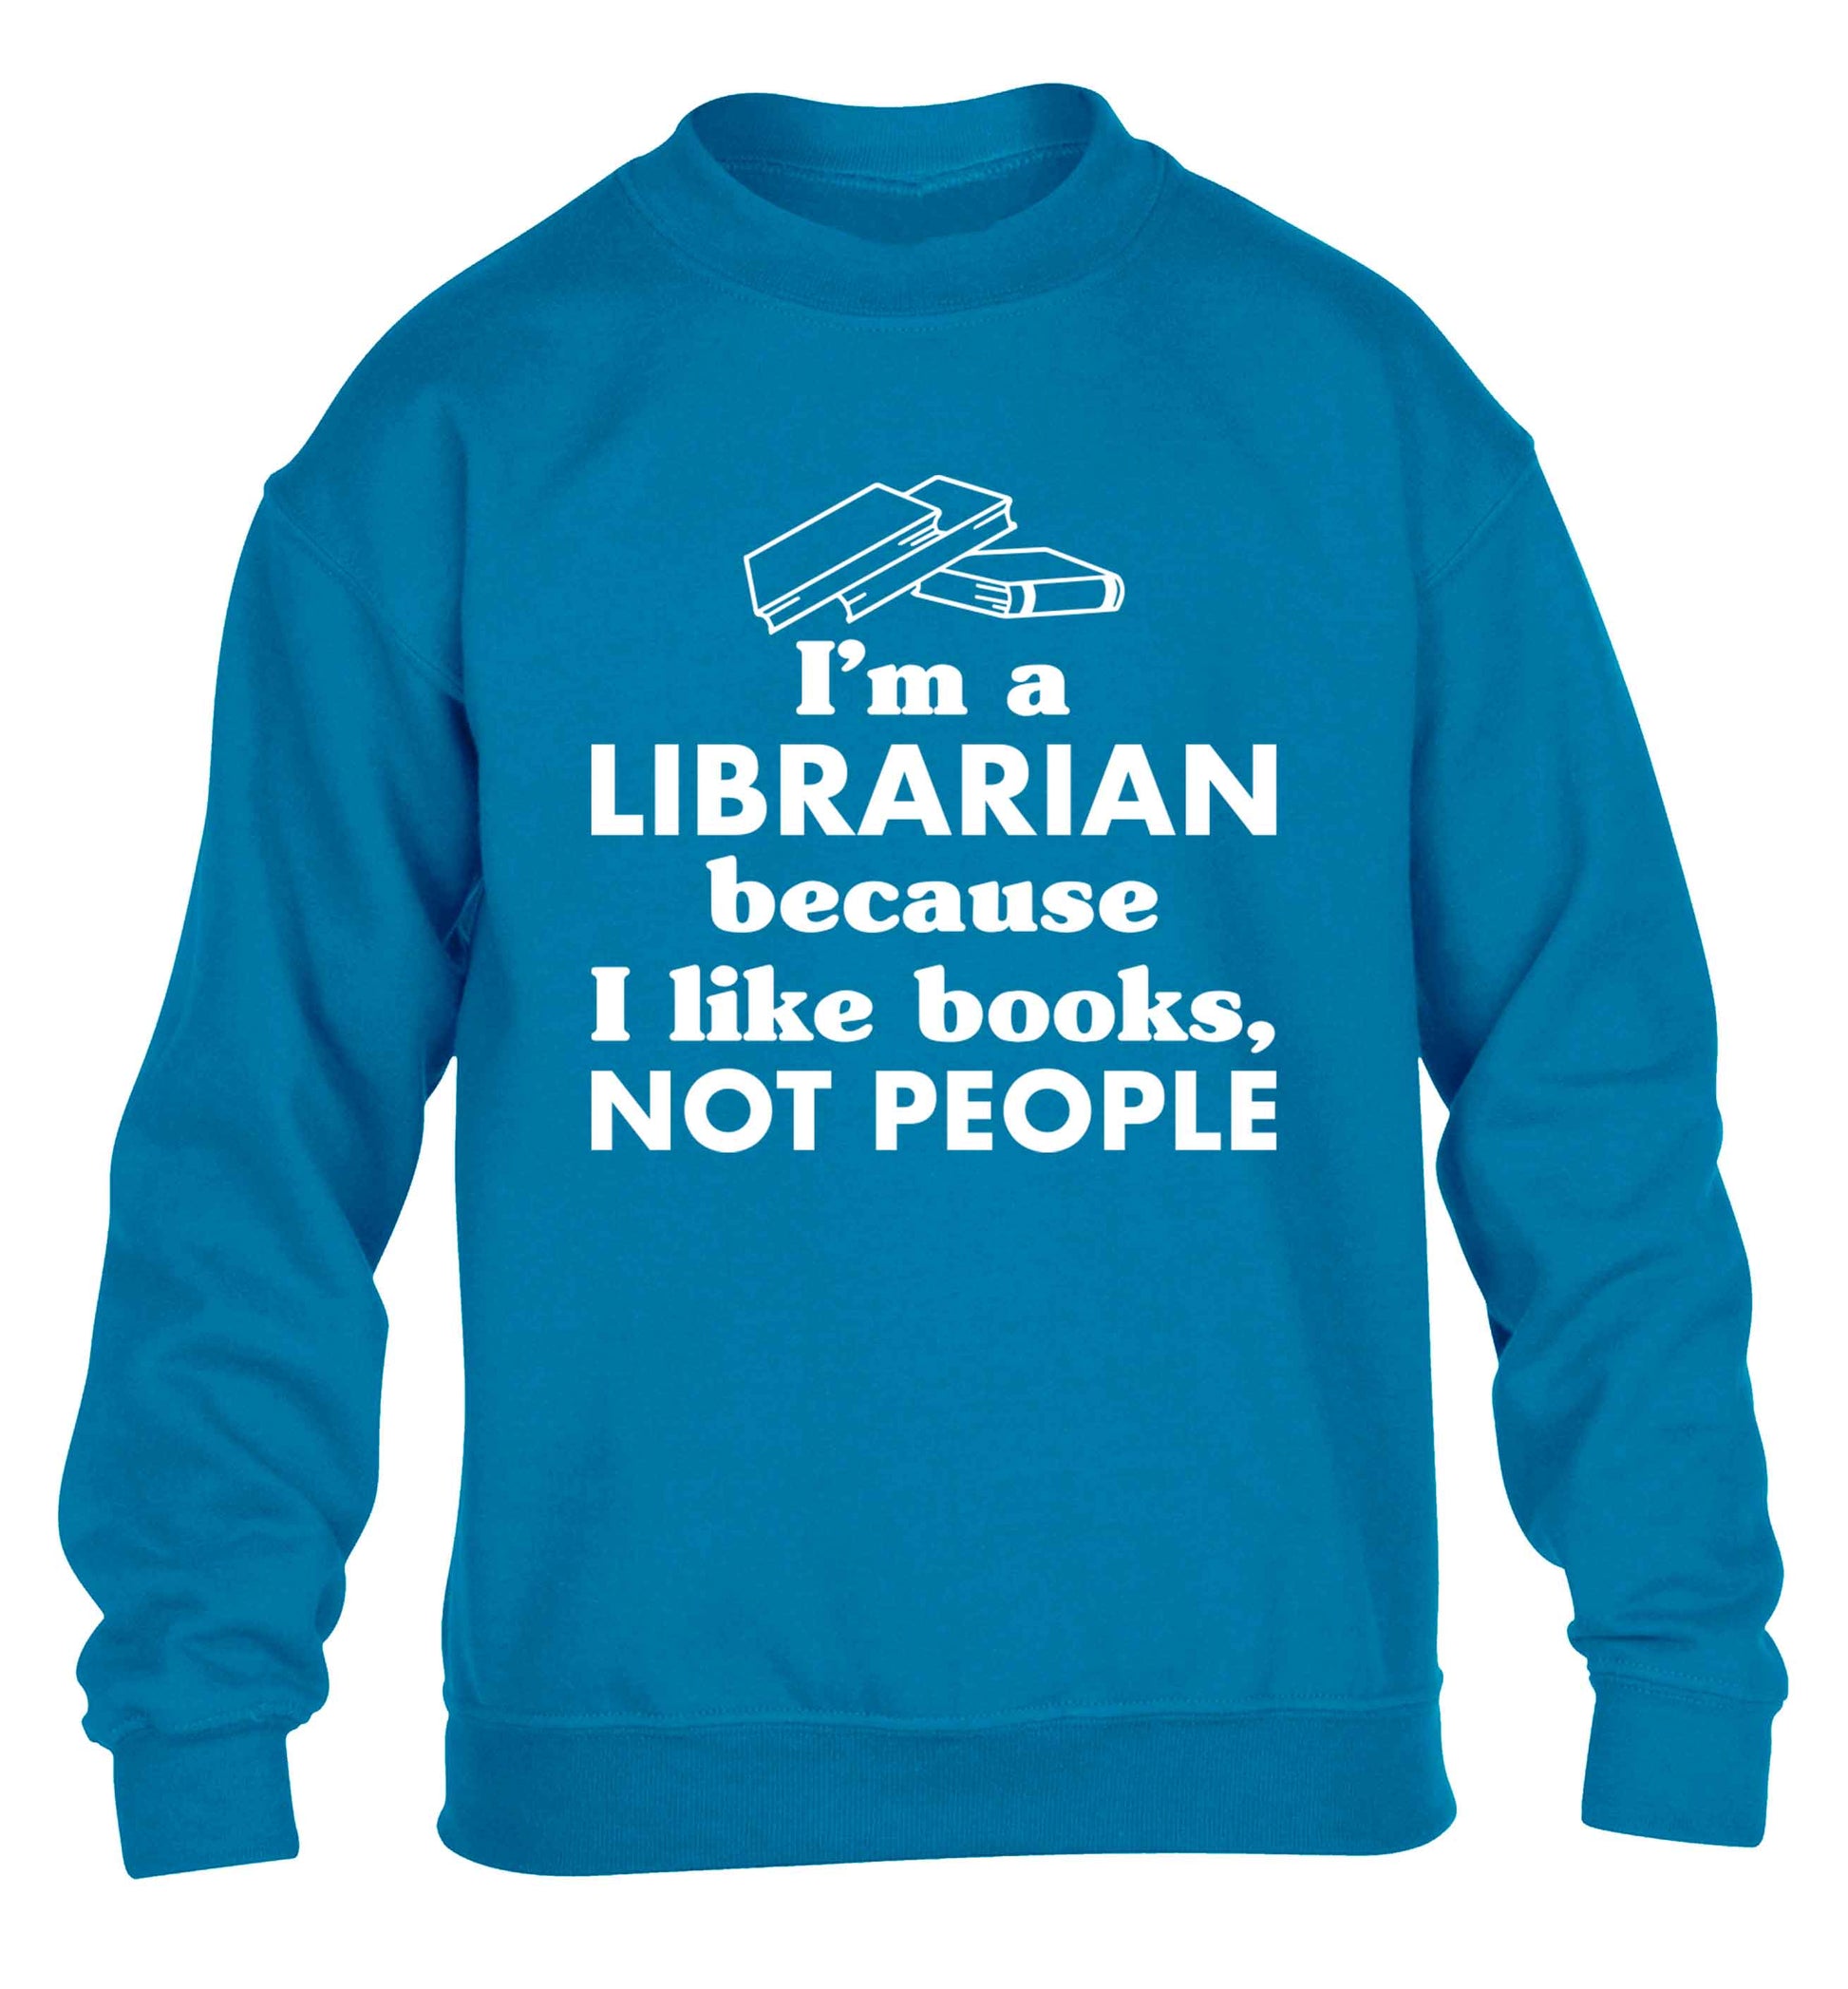 I'm a librarian because I like books not people children's blue sweater 12-13 Years